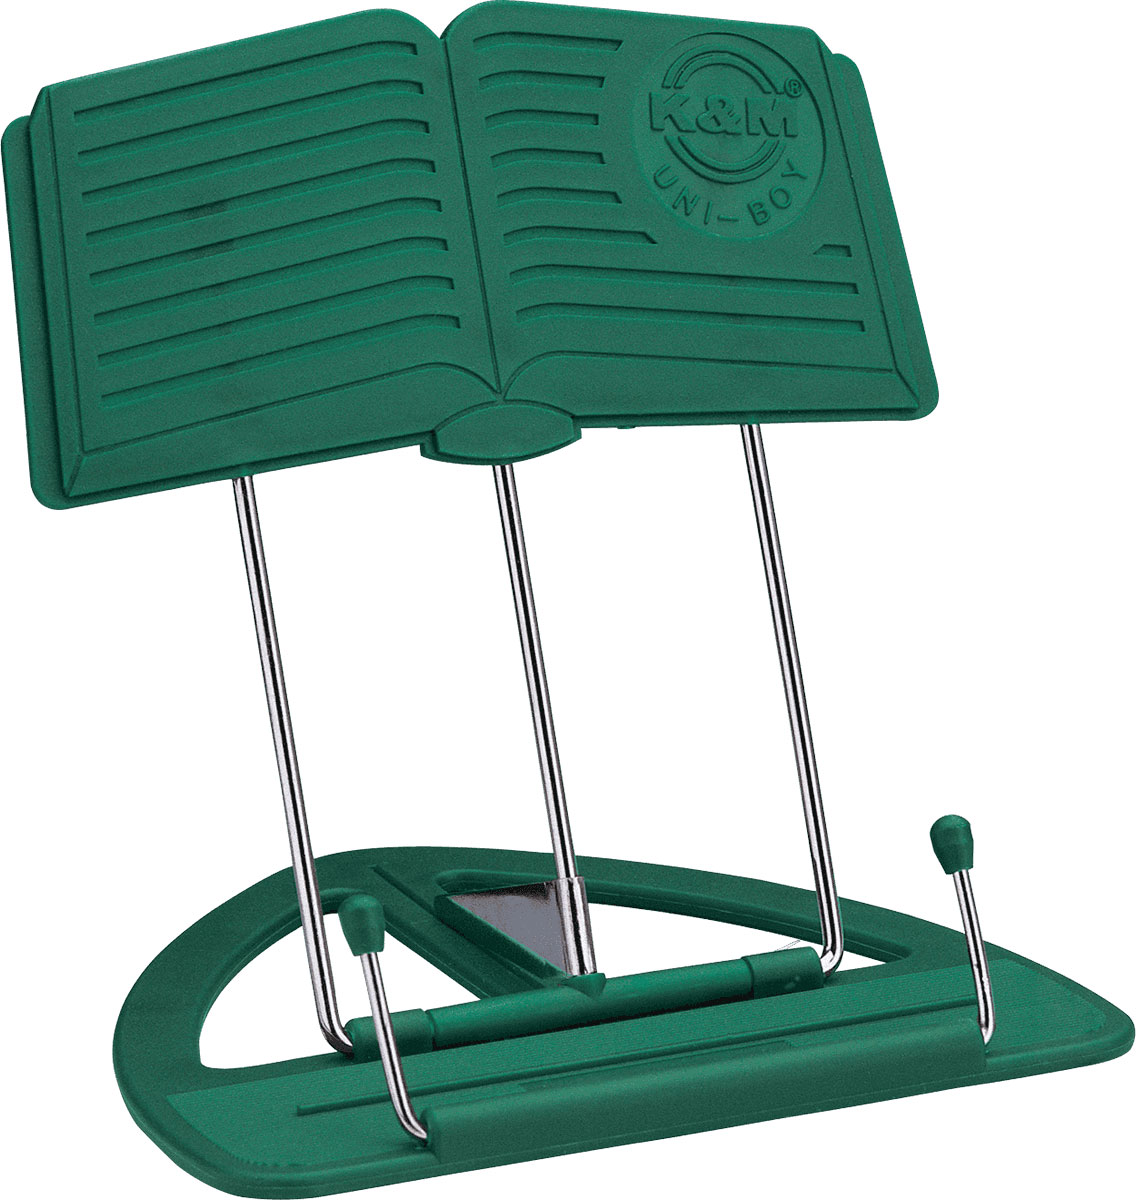 K&M PACK OF 12 GREEN UNIBOY MUSIC STAND